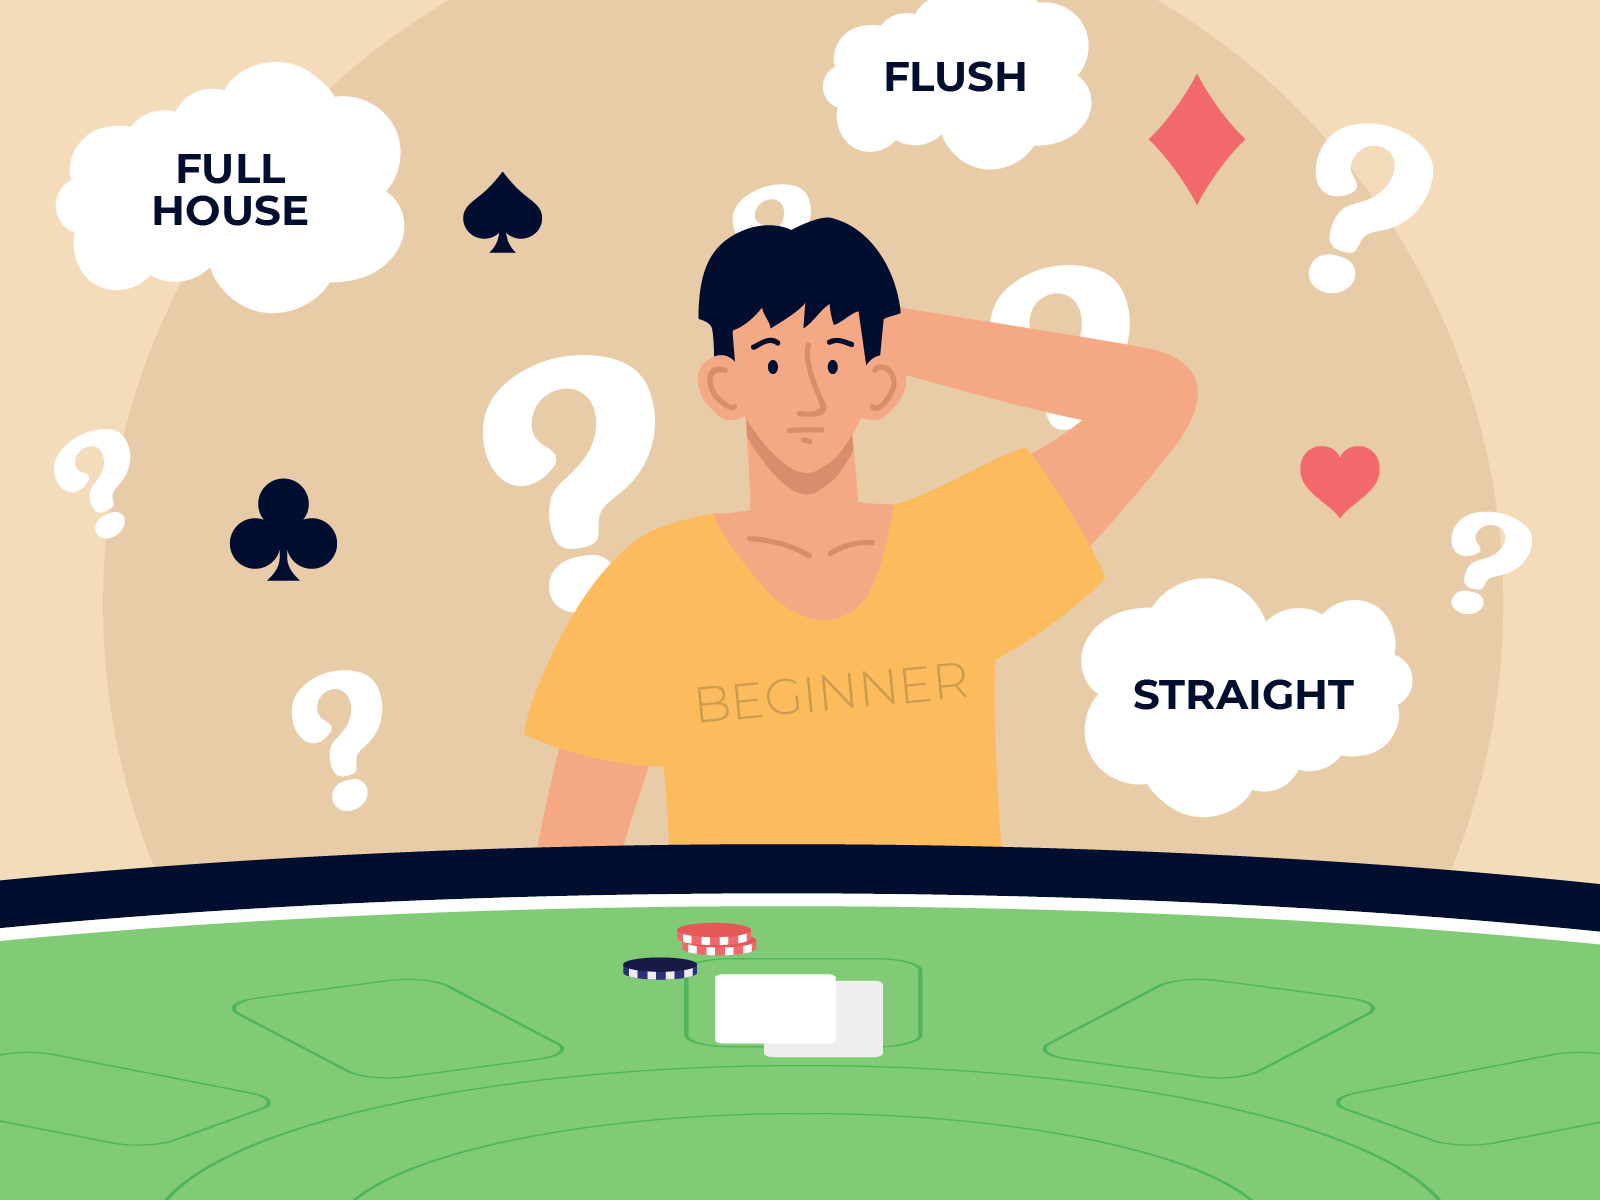 Poker Sequence – What are poker rankings and order?